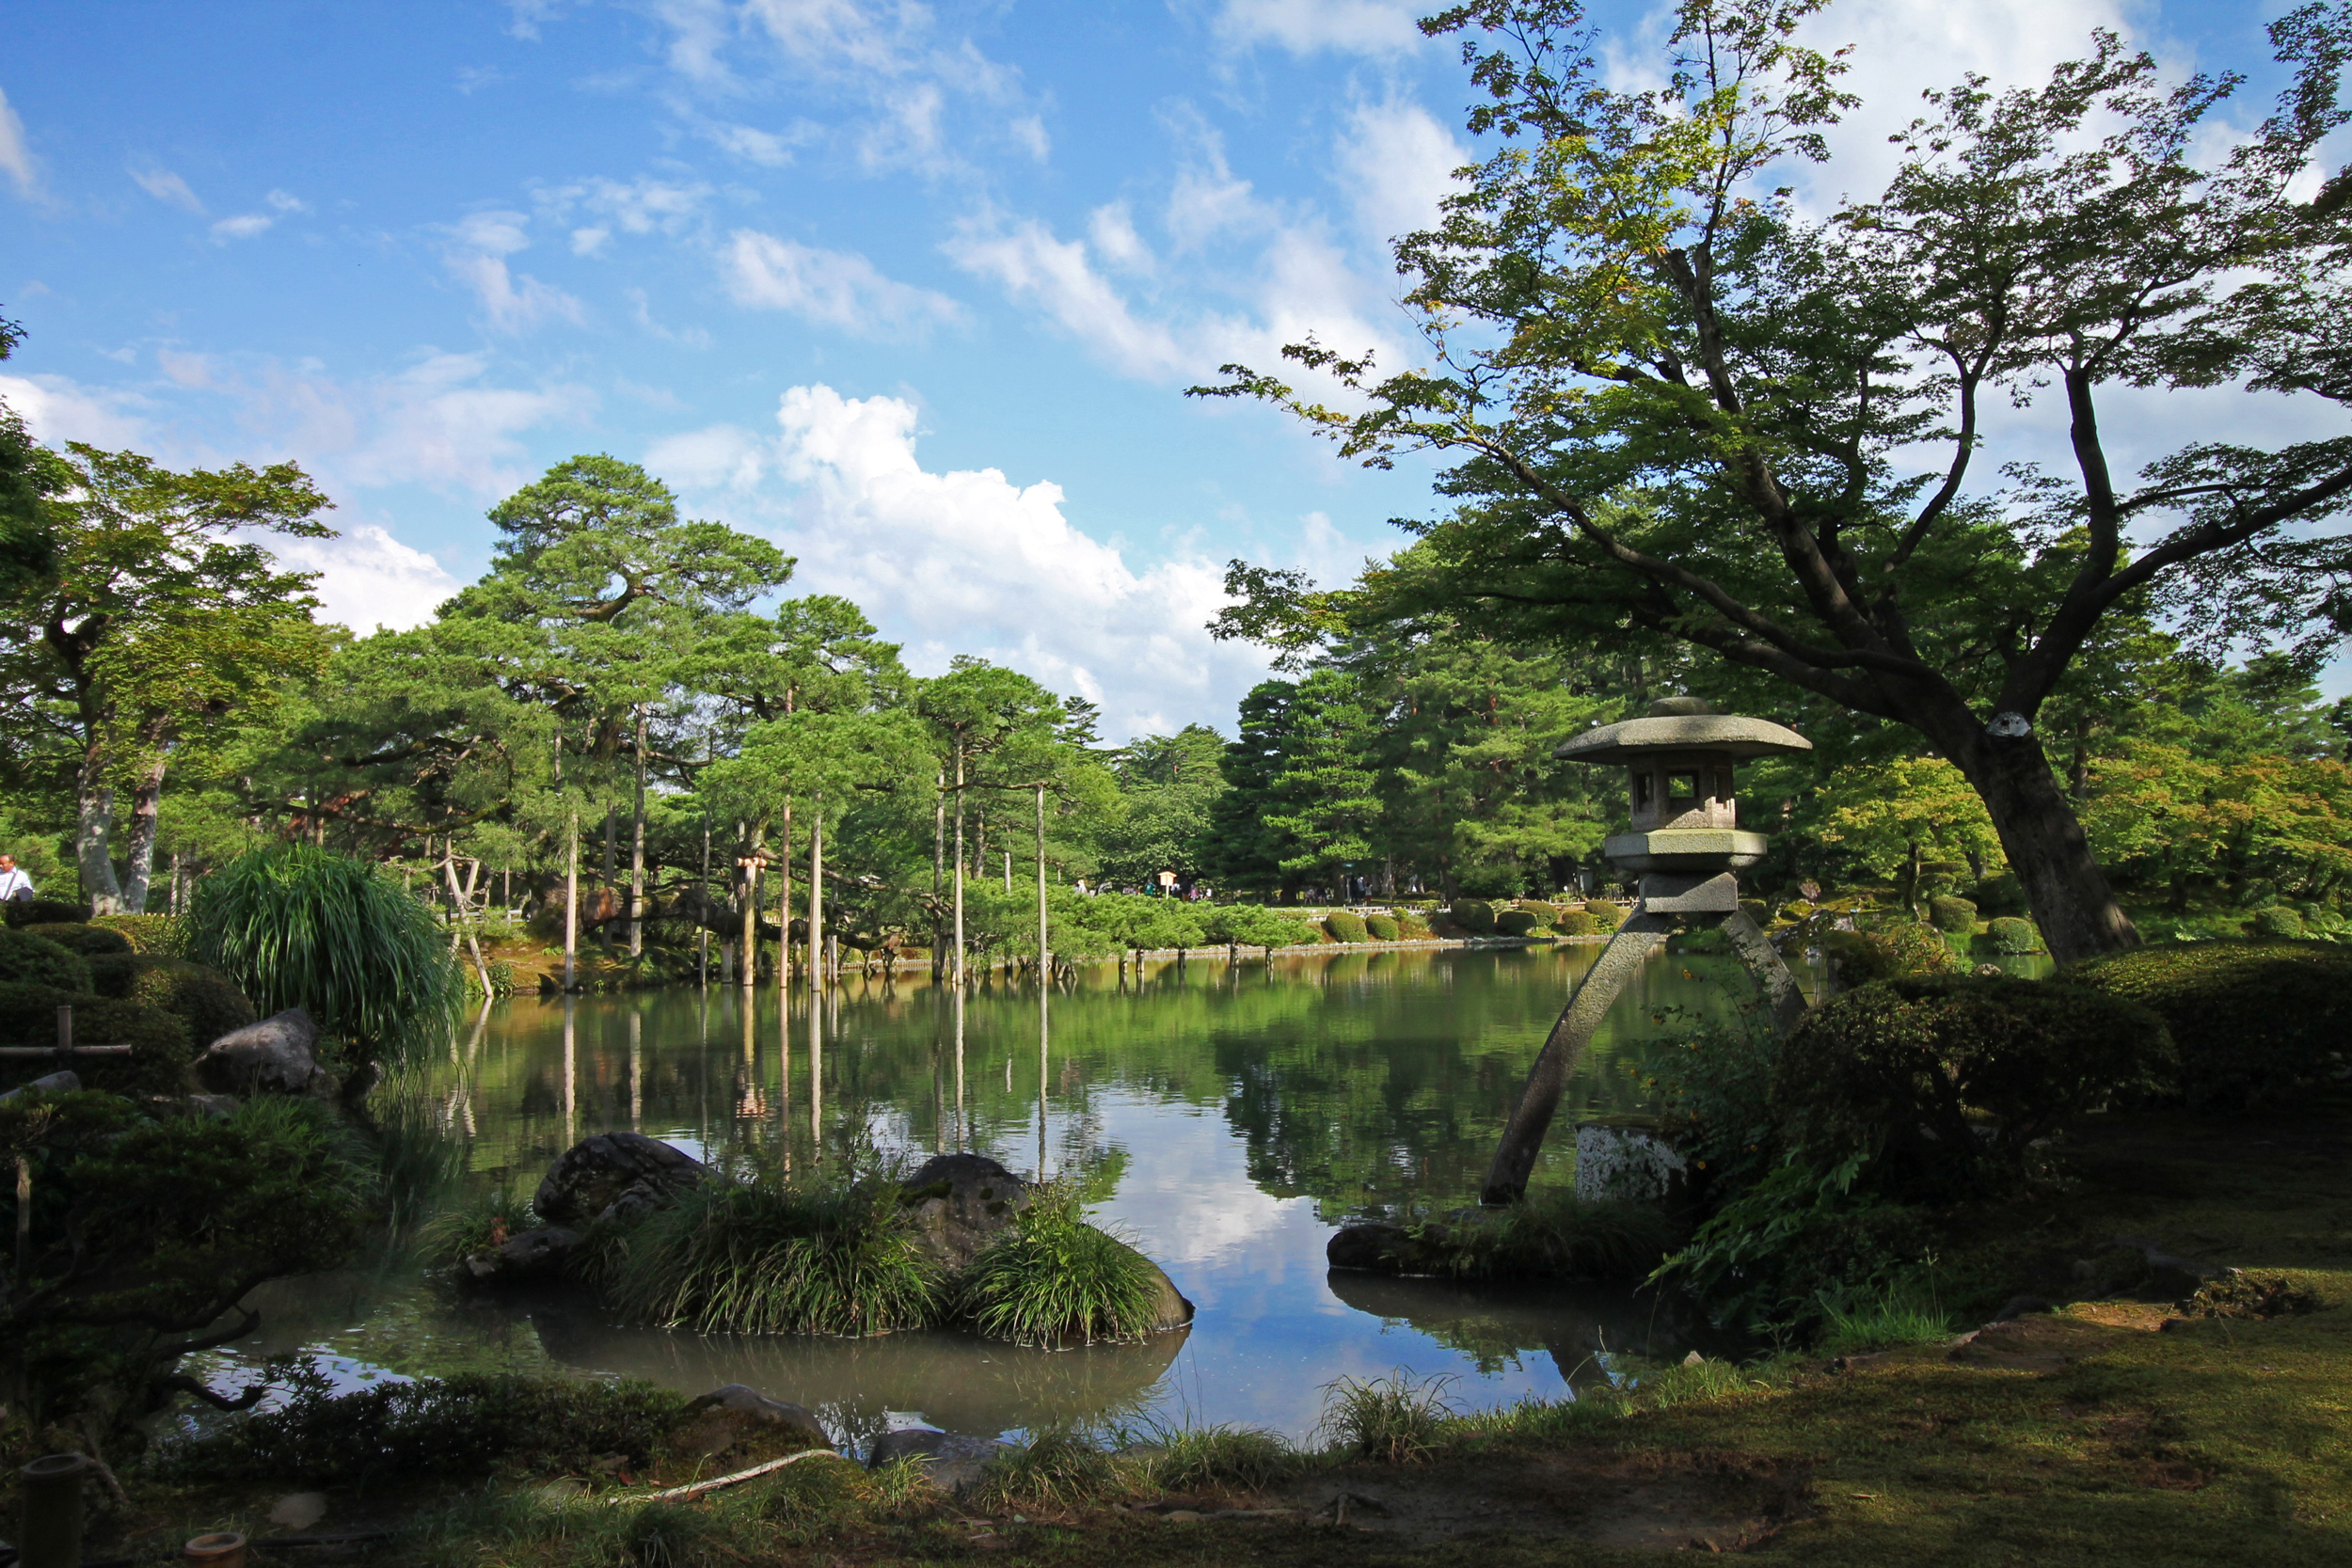 Kasumi Pond in Kenrokuen Garden is surrounded by some 8,750 trees, including a neagarimatsu (raised root pine) tree that’s around 170 years old.